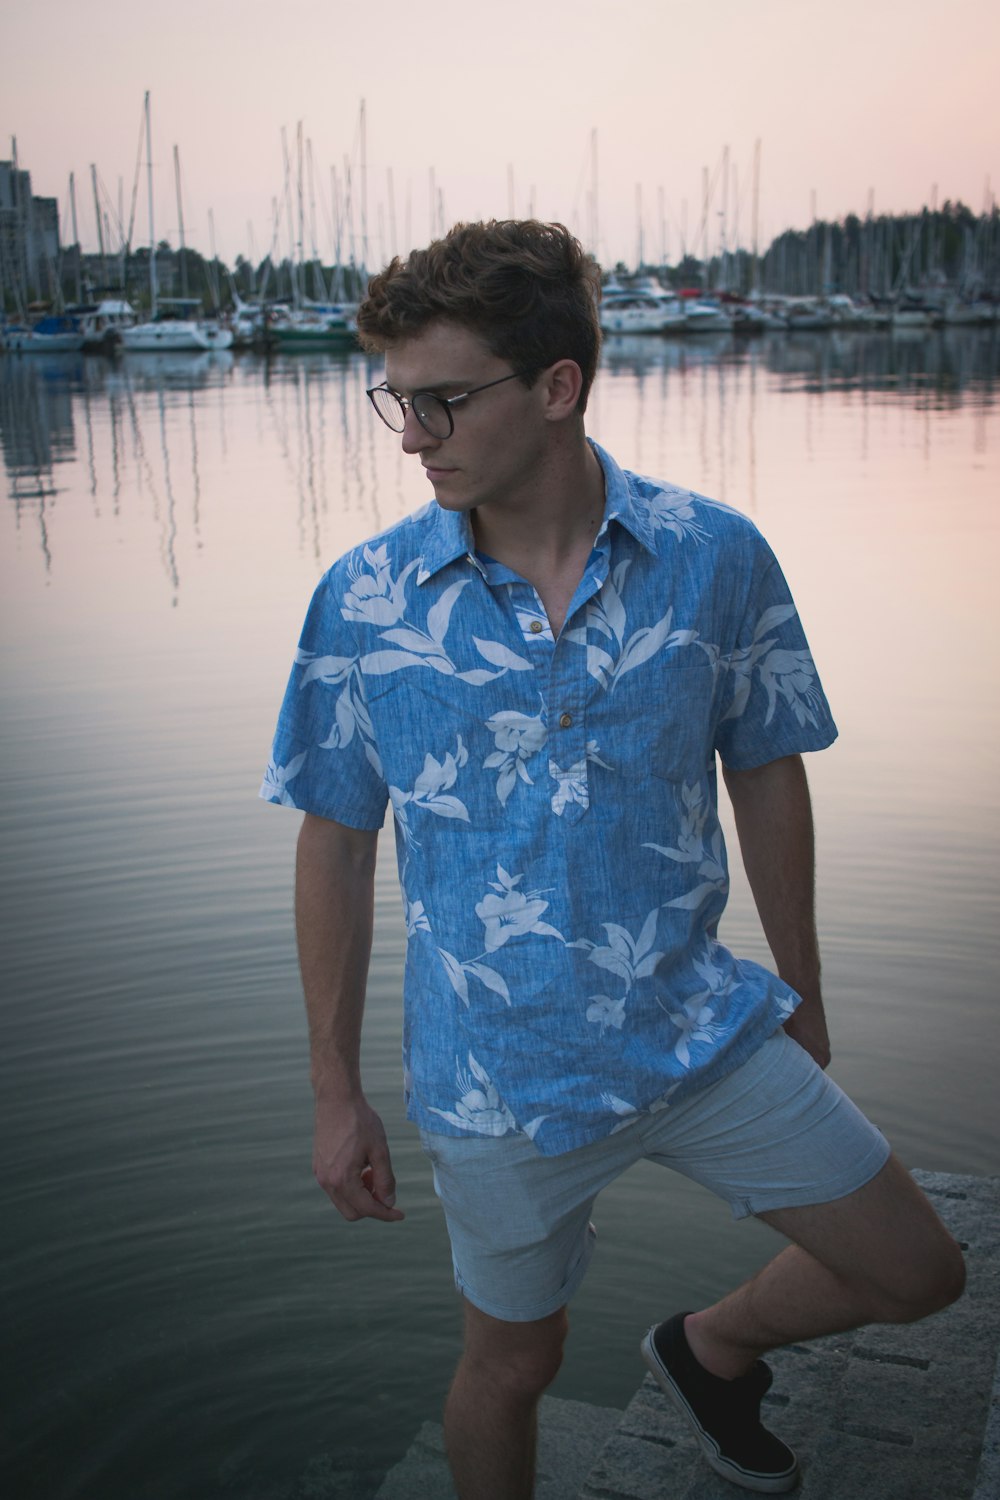 man in blue and white floral button up t-shirt standing near body of water during